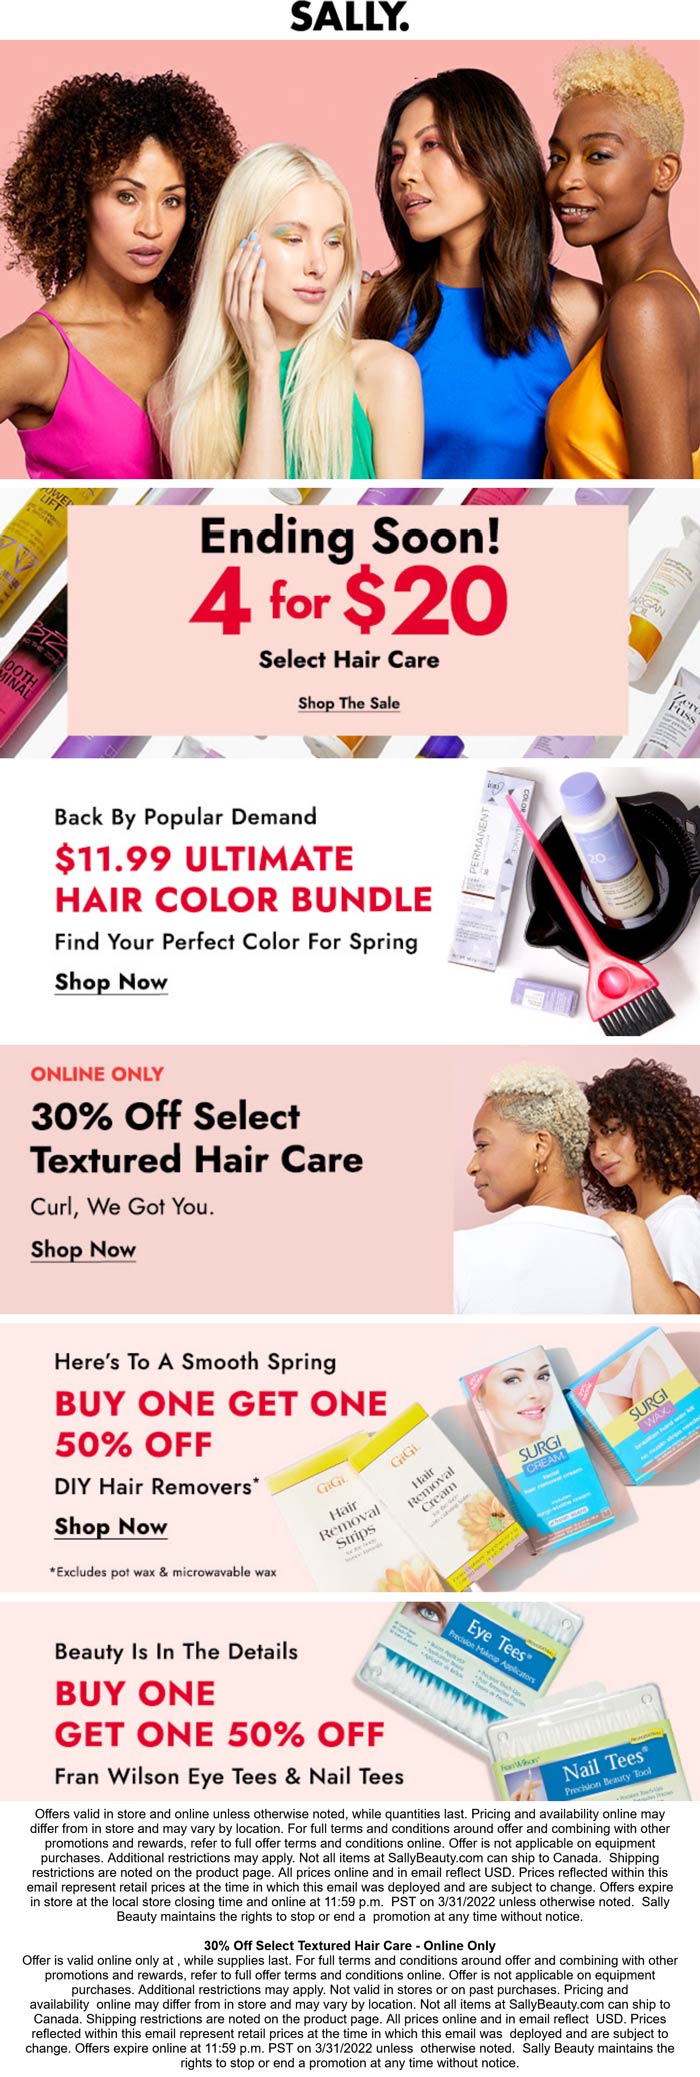 Sally stores Coupon  30% off textured hair care & more today at Sally Beauty #sally 